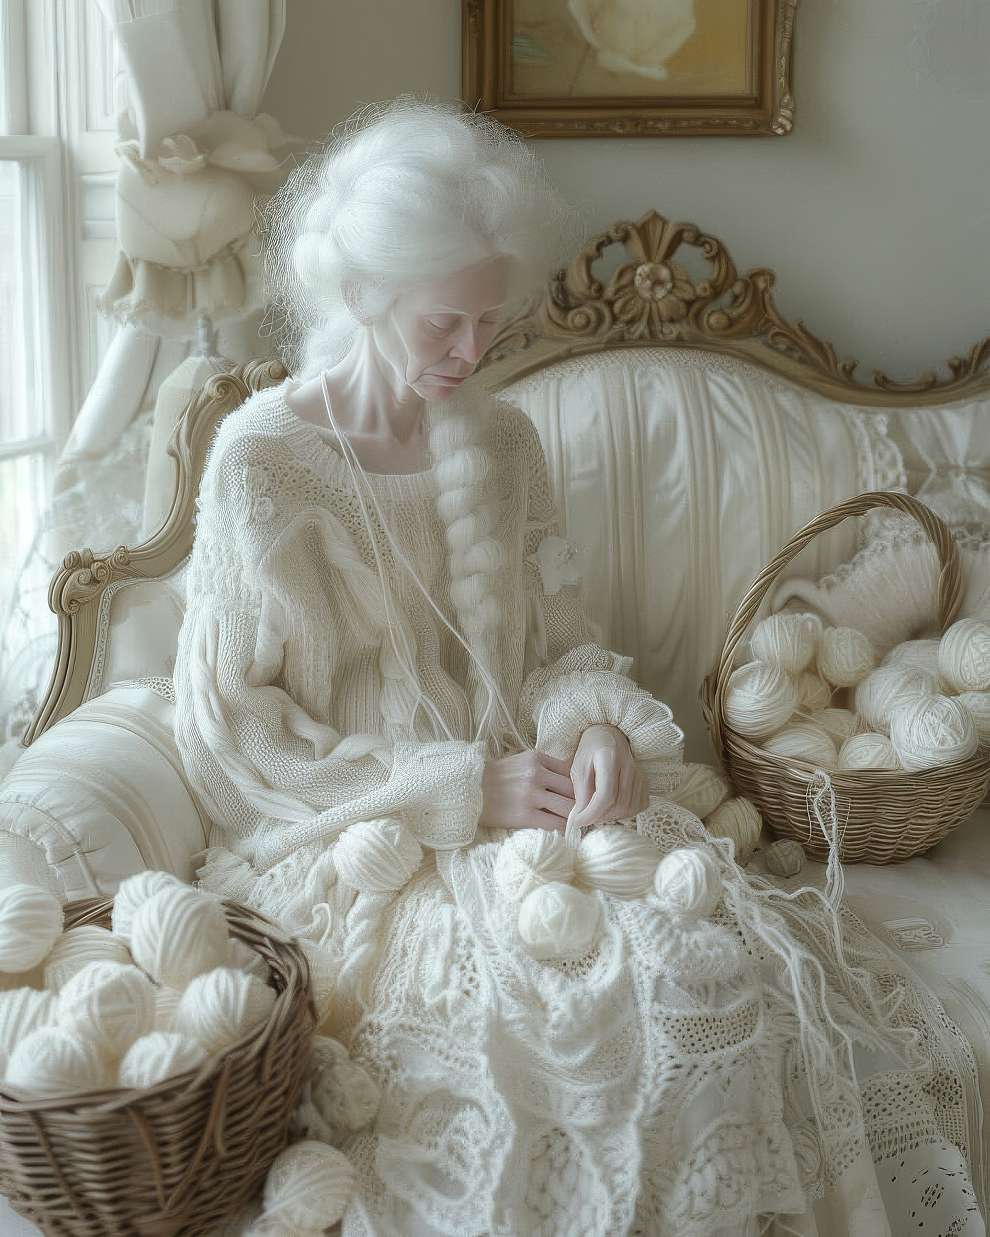 Milky78 An Old Albino Woman Sits In Victorian Living Room On A 4ac9b945 A74a 4bf7 8f5d D5122bce2c05 661a97039914b 700 